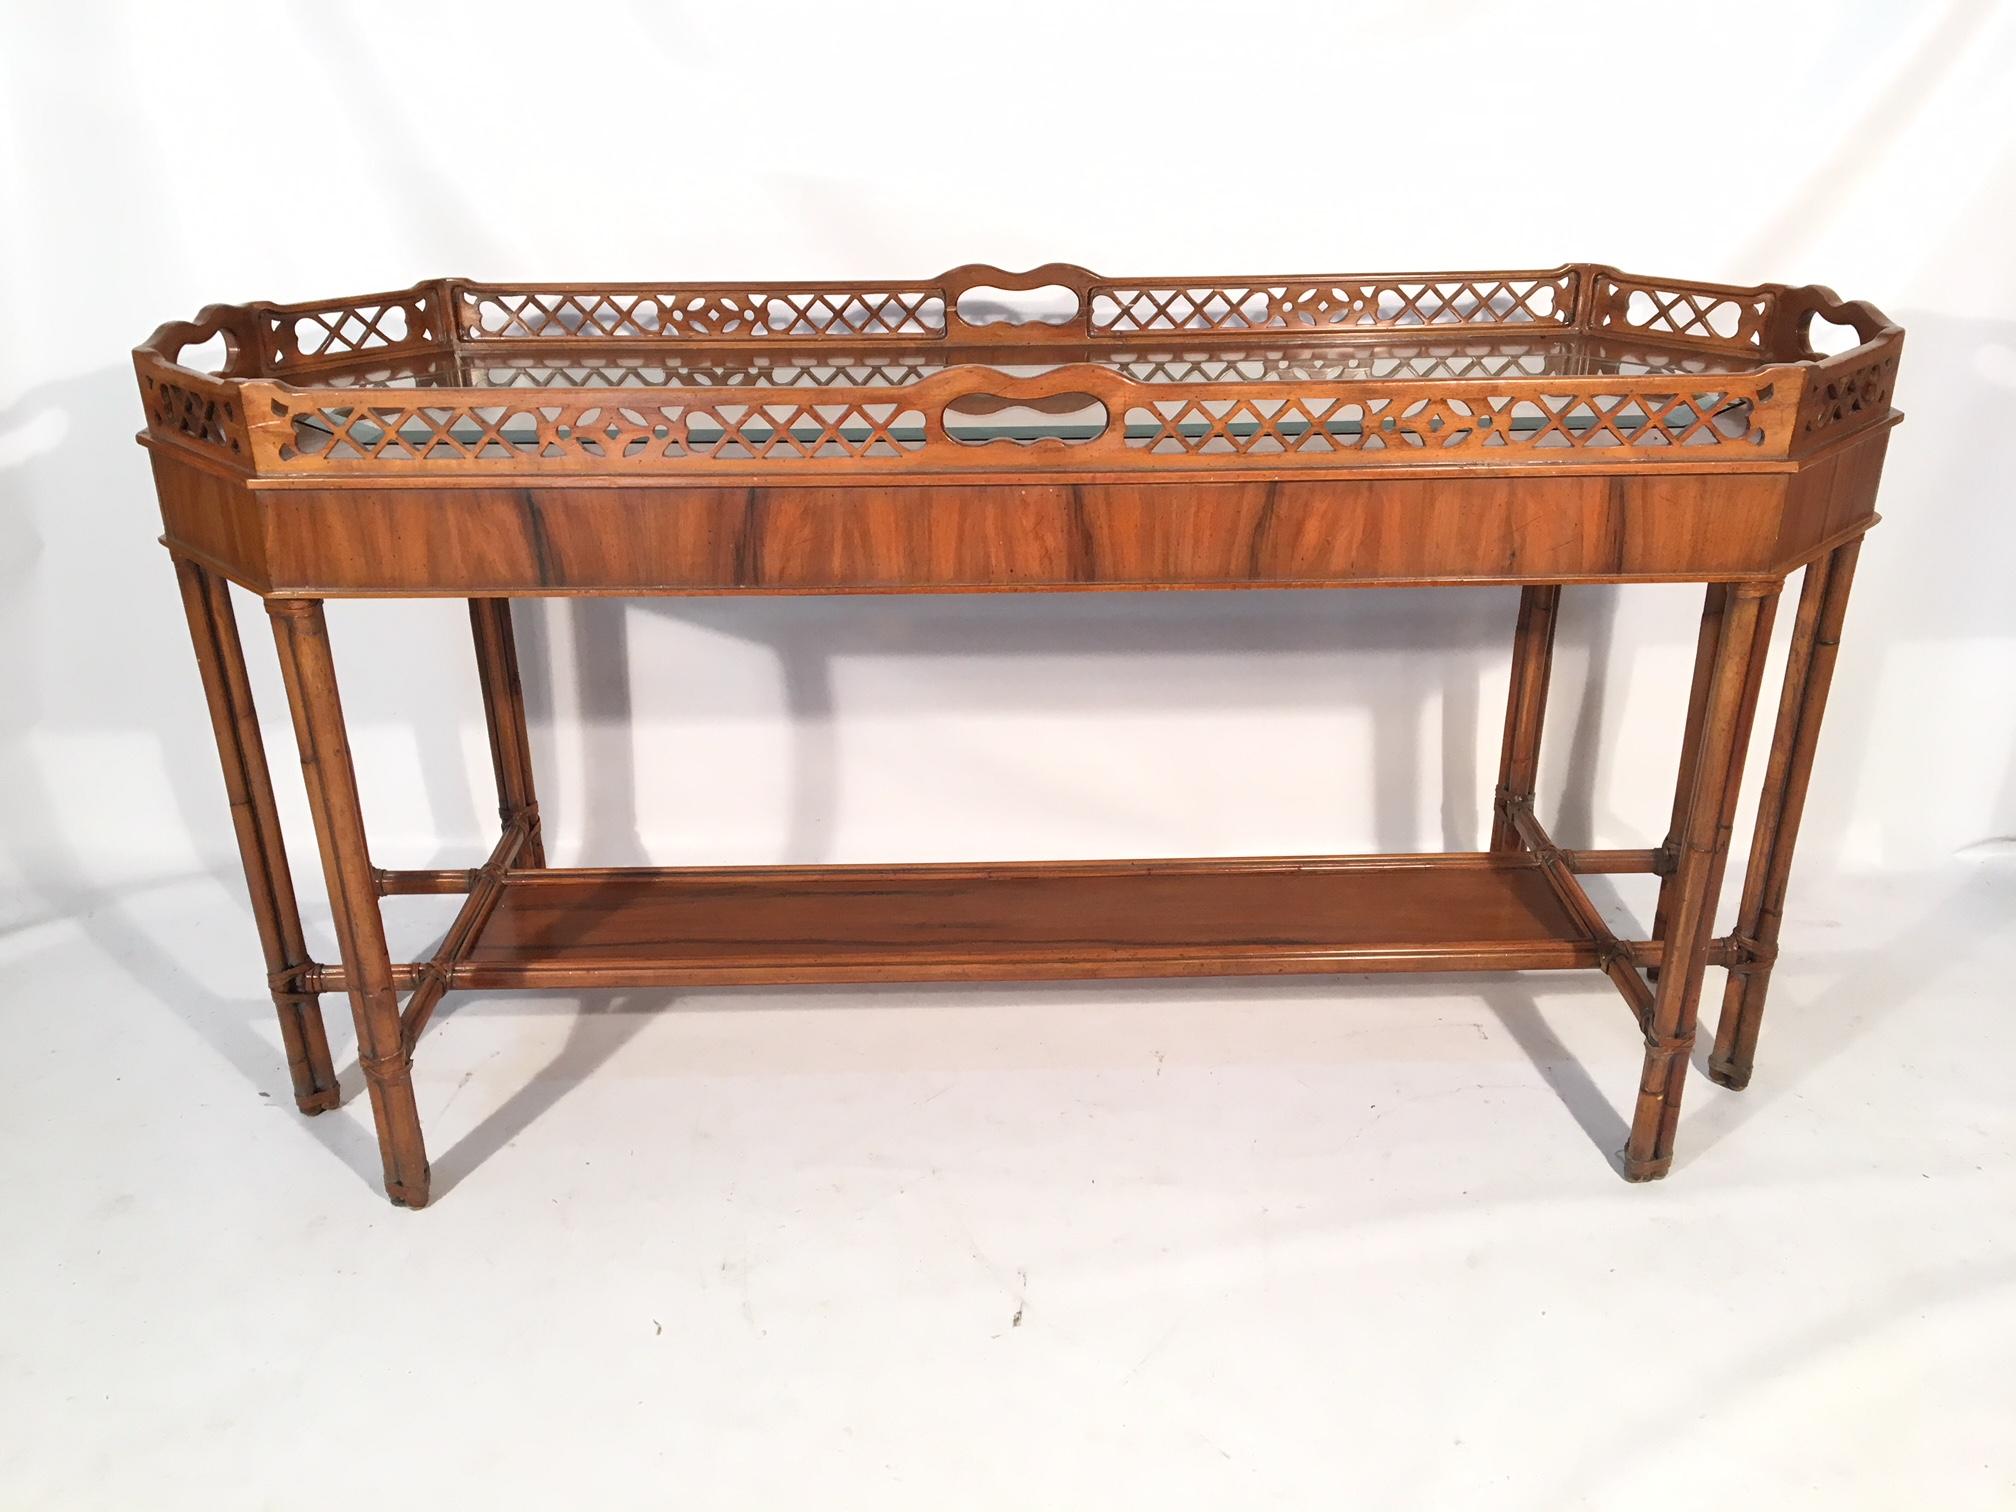 Faux bamboo console table features beveled glass top insert and carved wood gate details. Very good condition with very minor signs of age appropriate use.